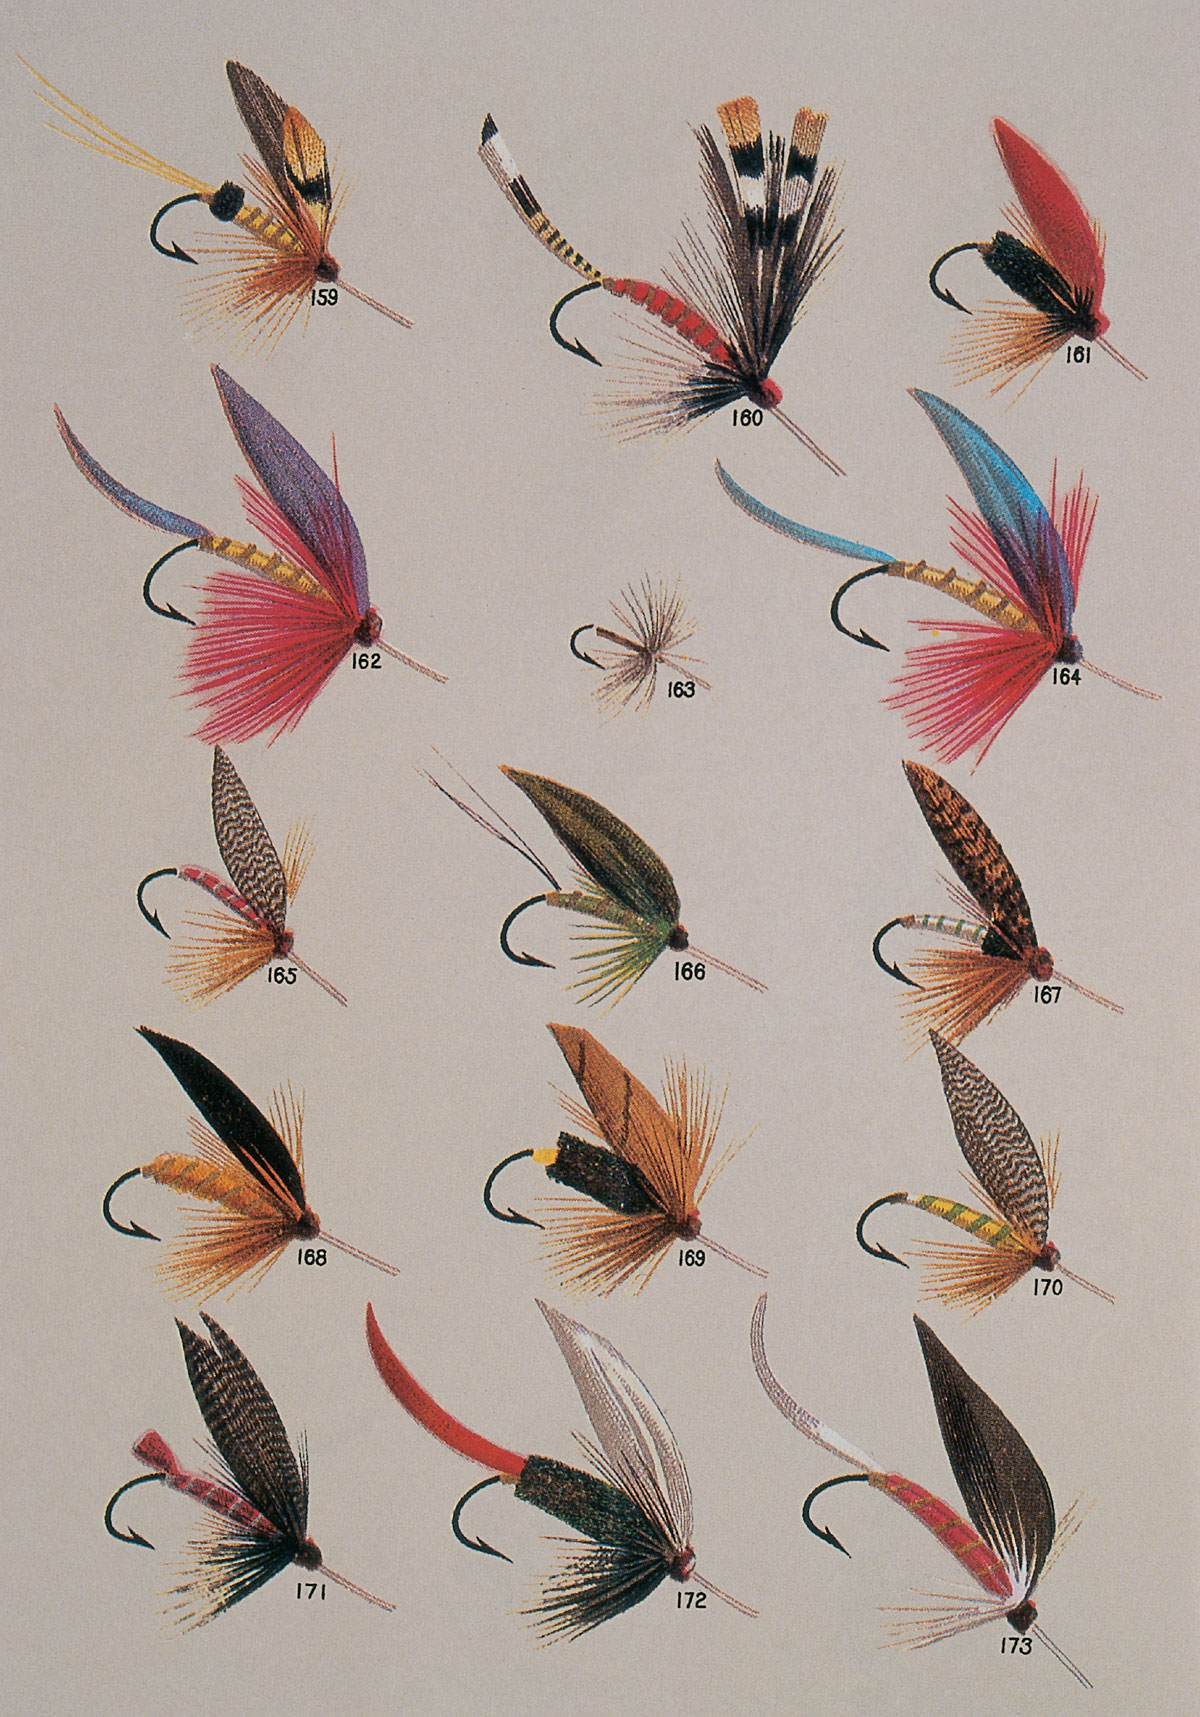 Illustrated examples of late nineteenth-century “attractor” pattern flies offered by C. F. Orvis Company.